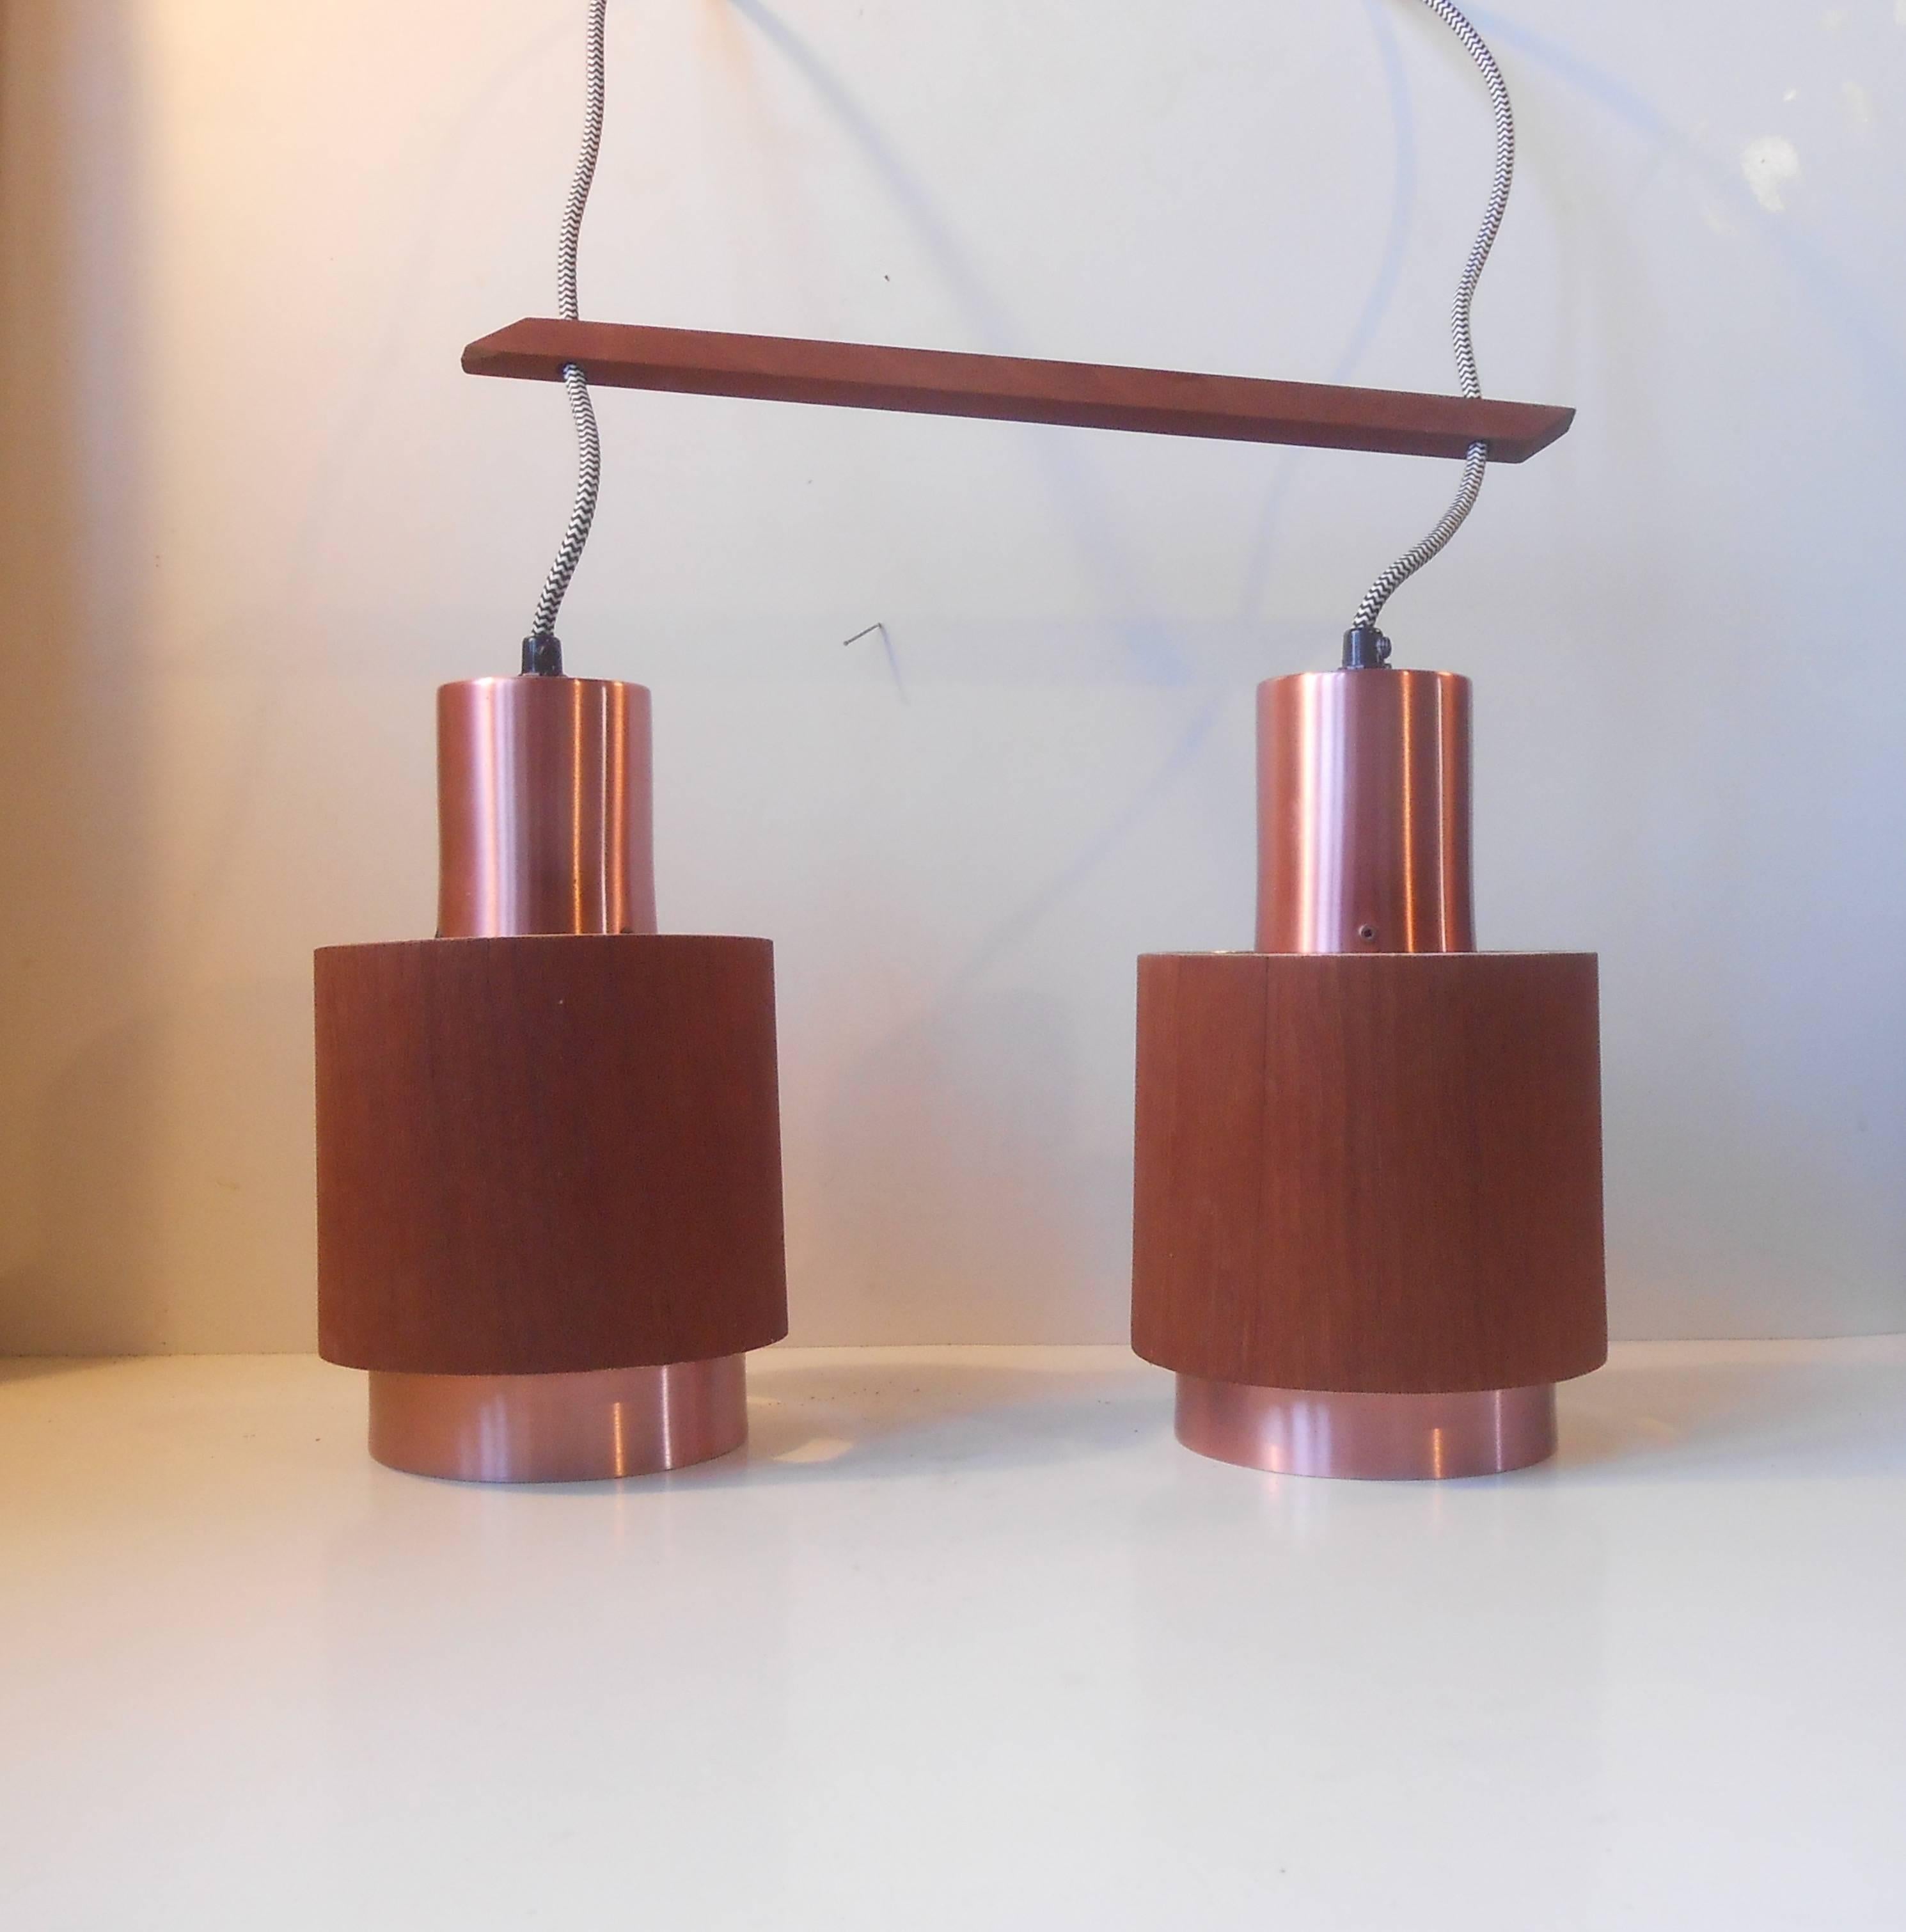 Stylish two-shaded adjustable pendant lamp with genuine teak veneer and rosé toned copper alloy to the aluminium based shades. Width in total: 14 inches, height: adjustable, individual shade diameter: 6 inches.
Please have a look at my other